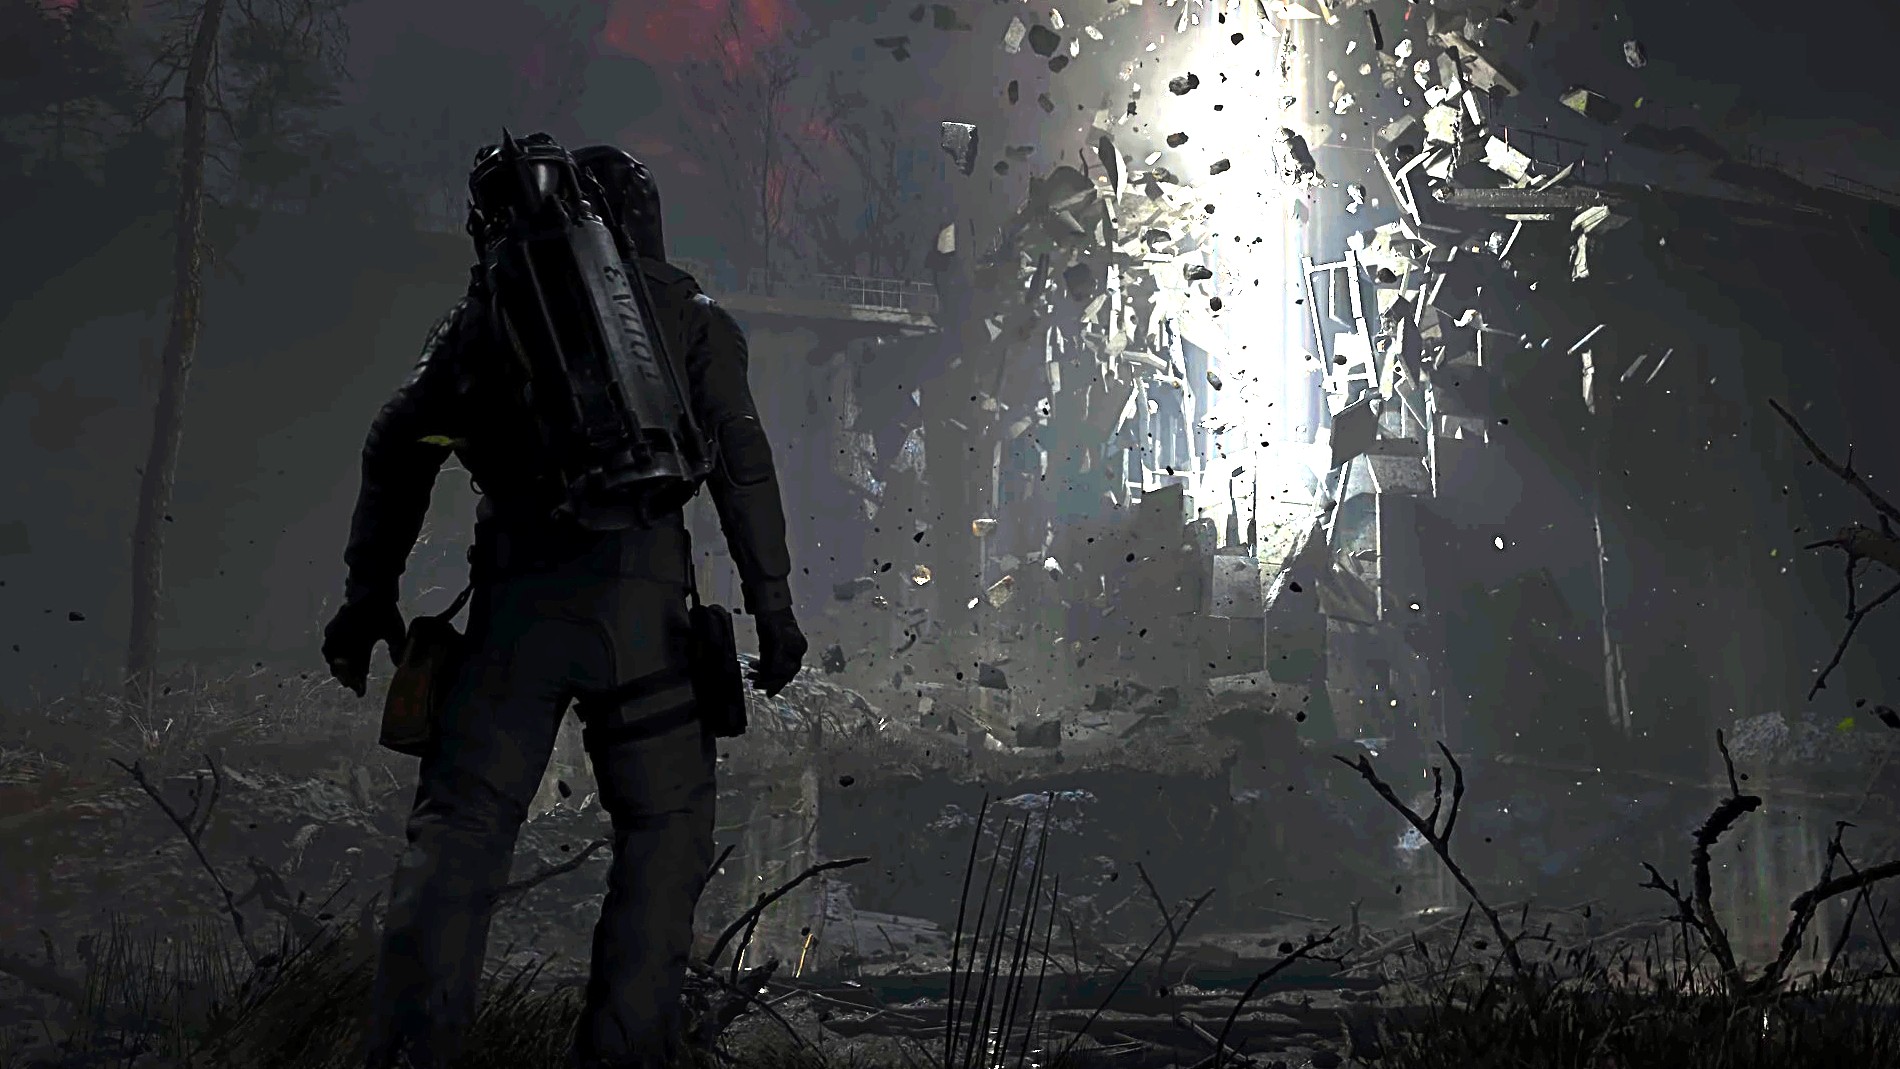 The new STALKER 2 trailer is a callback to the first game